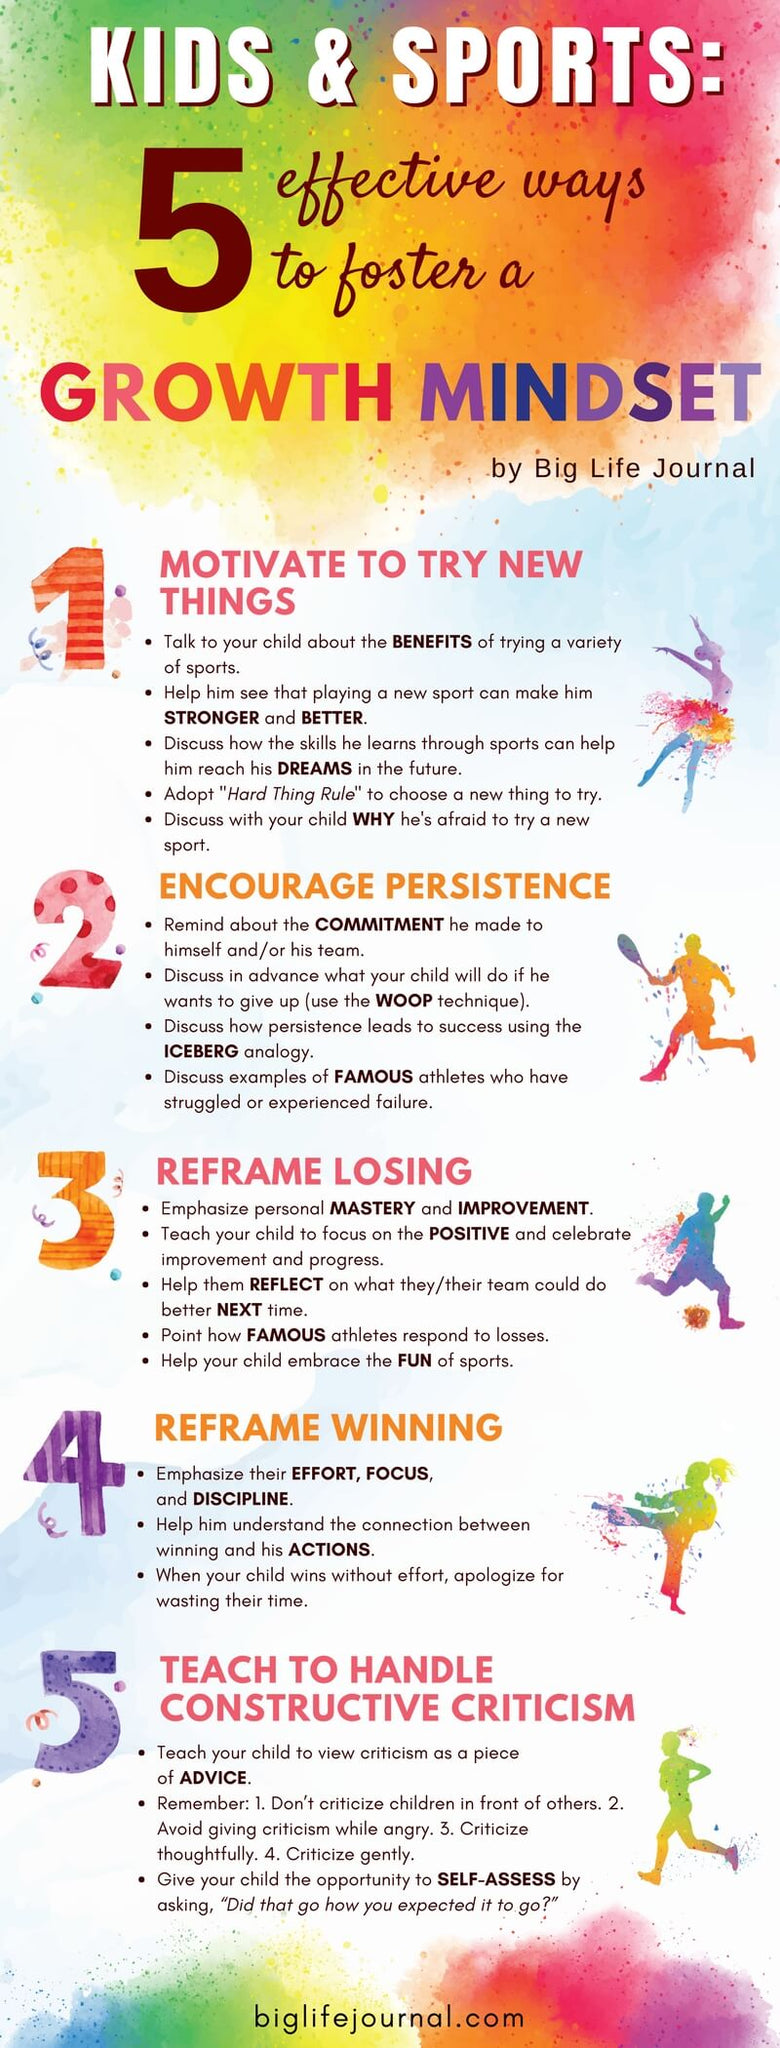 Discover 5 effective techniques to help your child develop a growth mindset in sports.